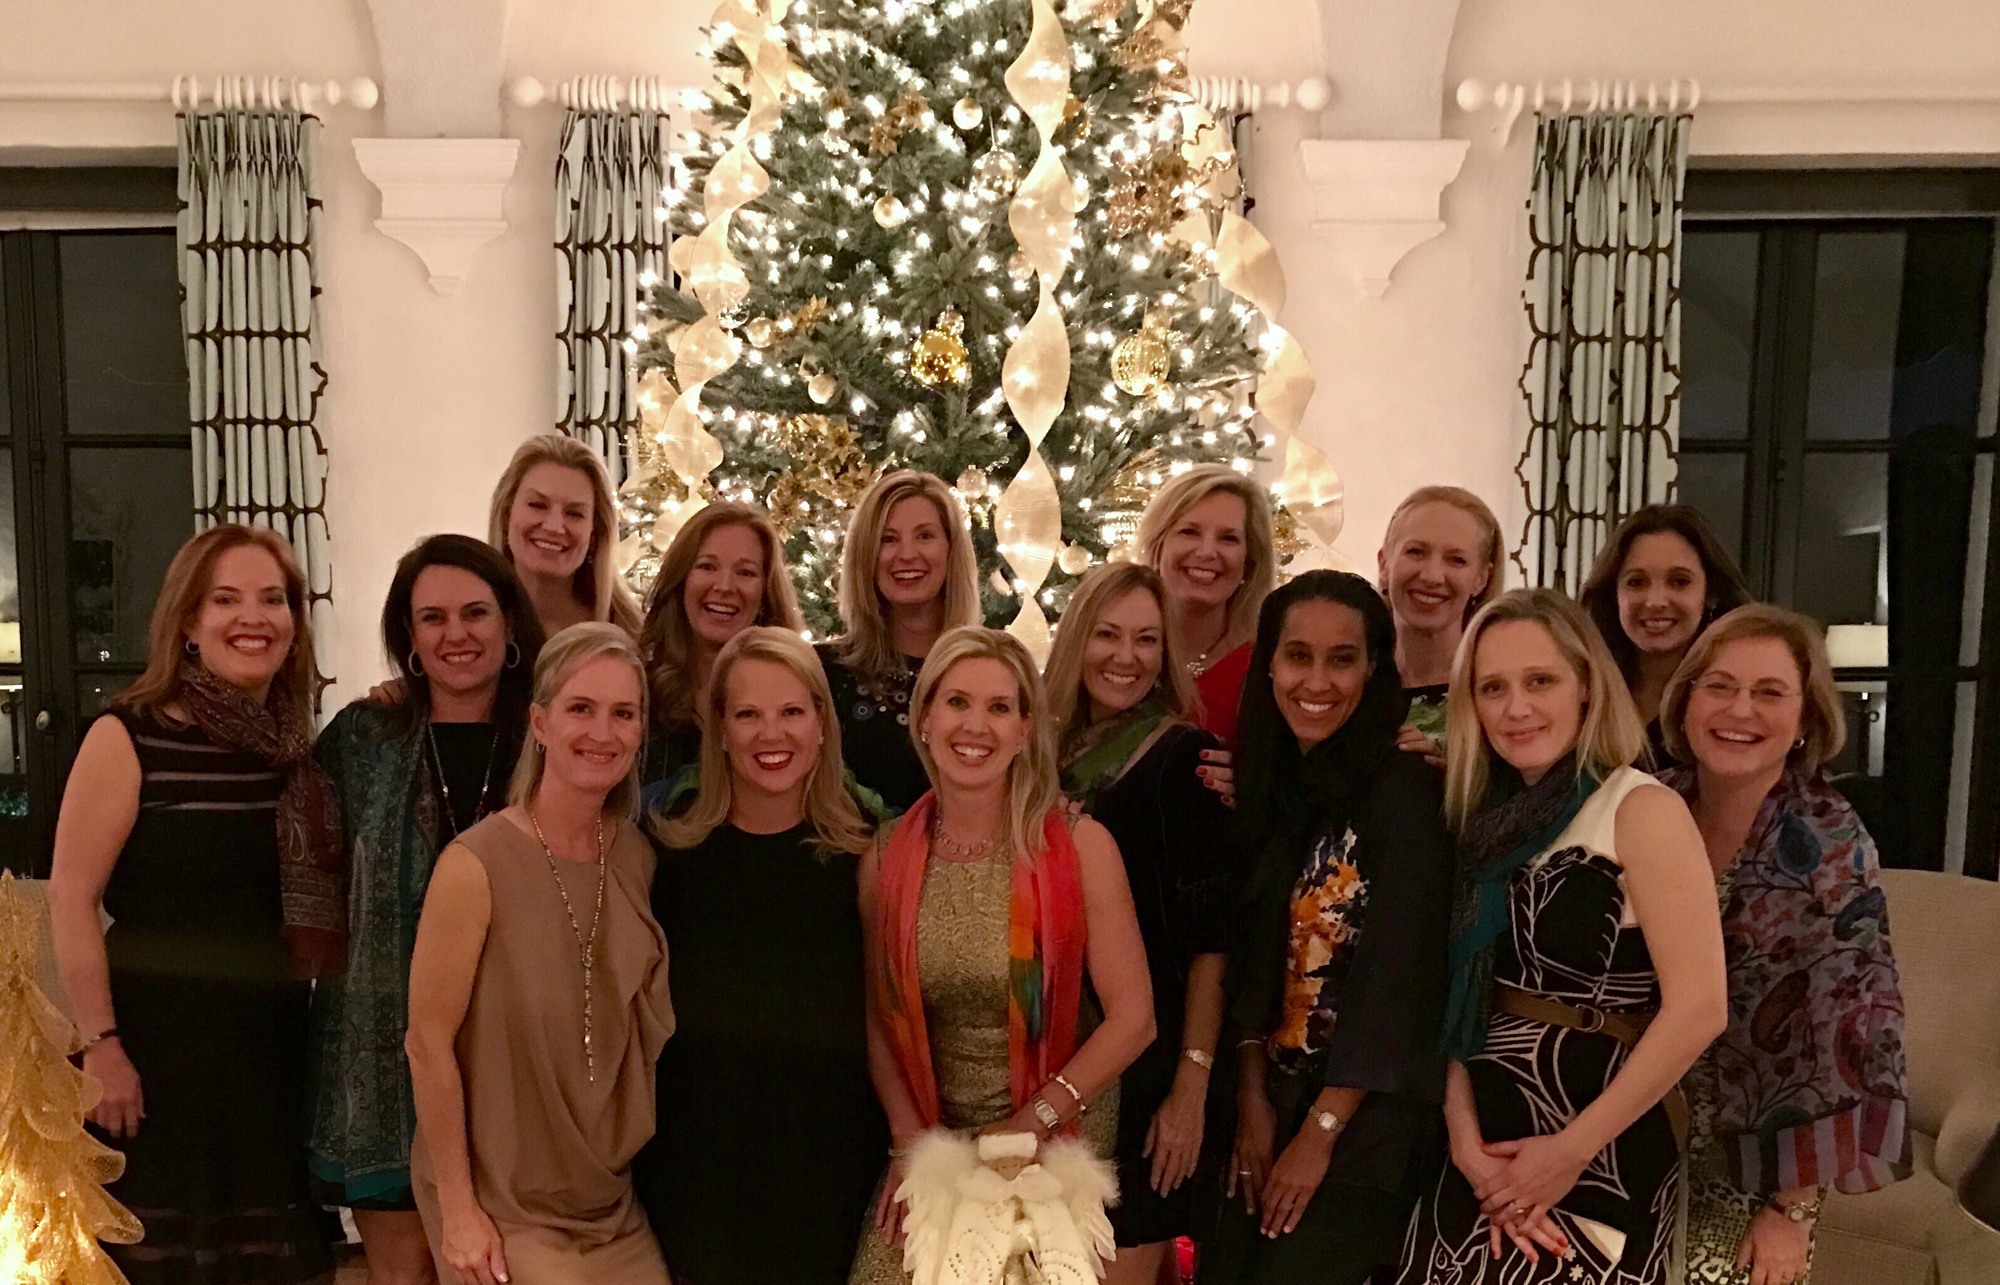 The Literary Lovelies held their annual holiday party at The Field Club on Dec. 14. Photo courtesy of Jamie Becker